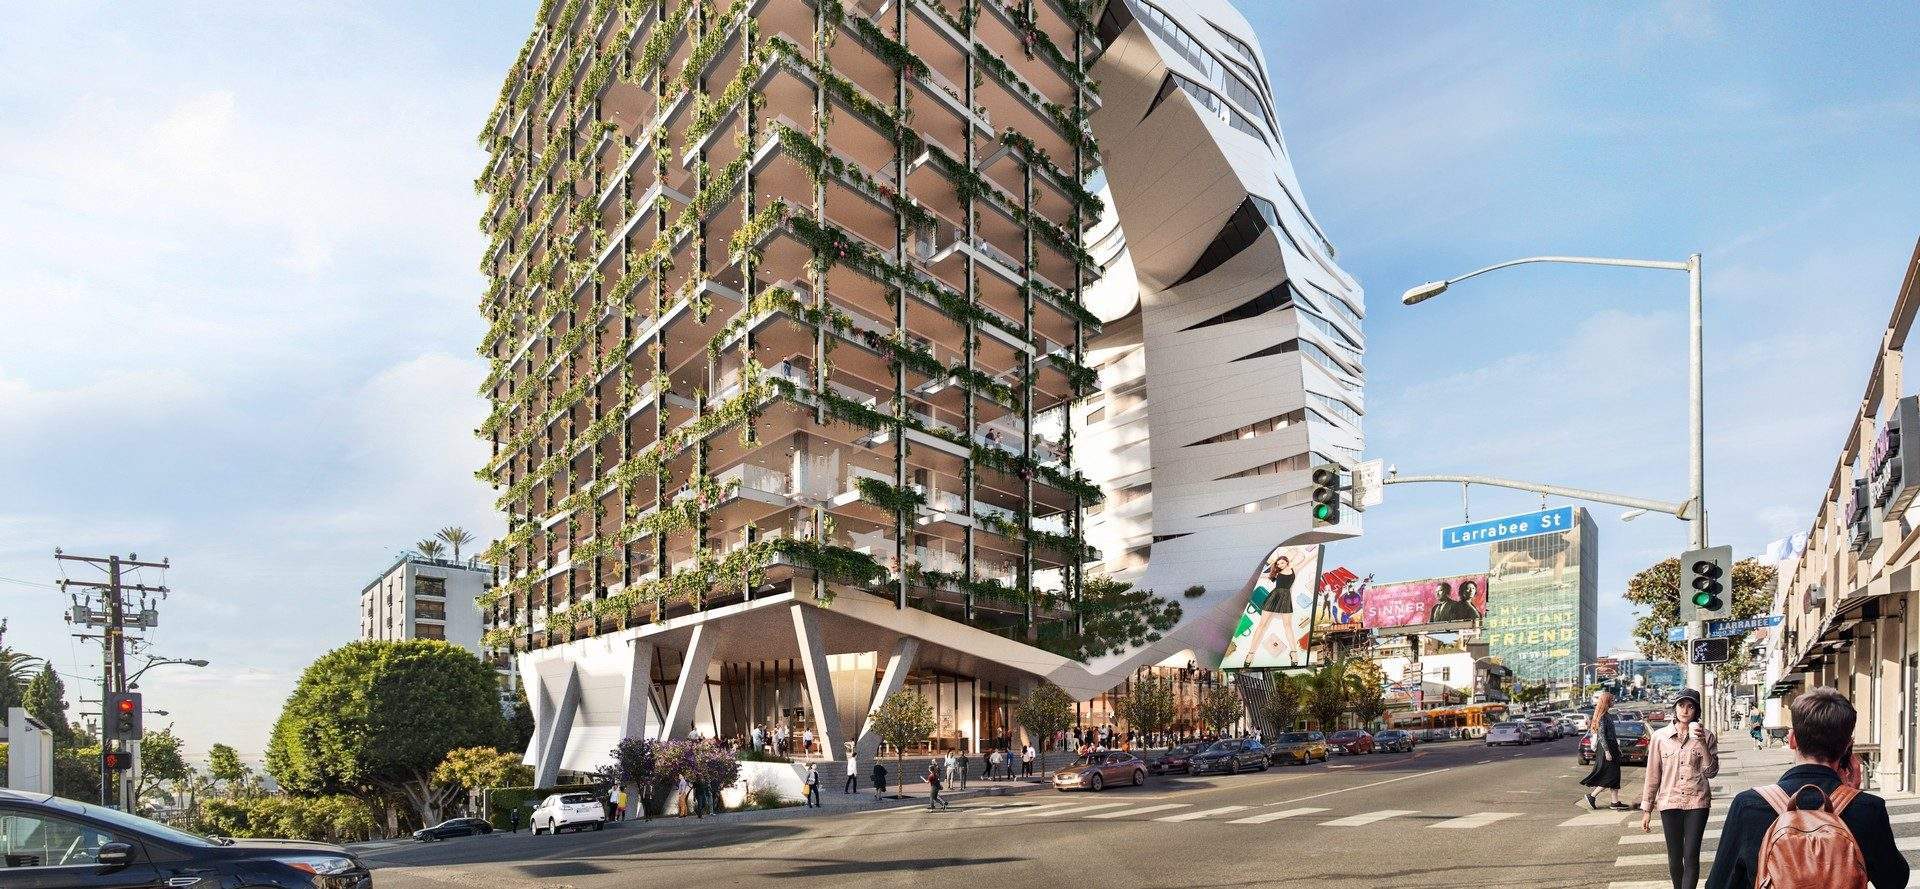 Rendering of the Viper Room replacing claw hotel designed by Morphosis